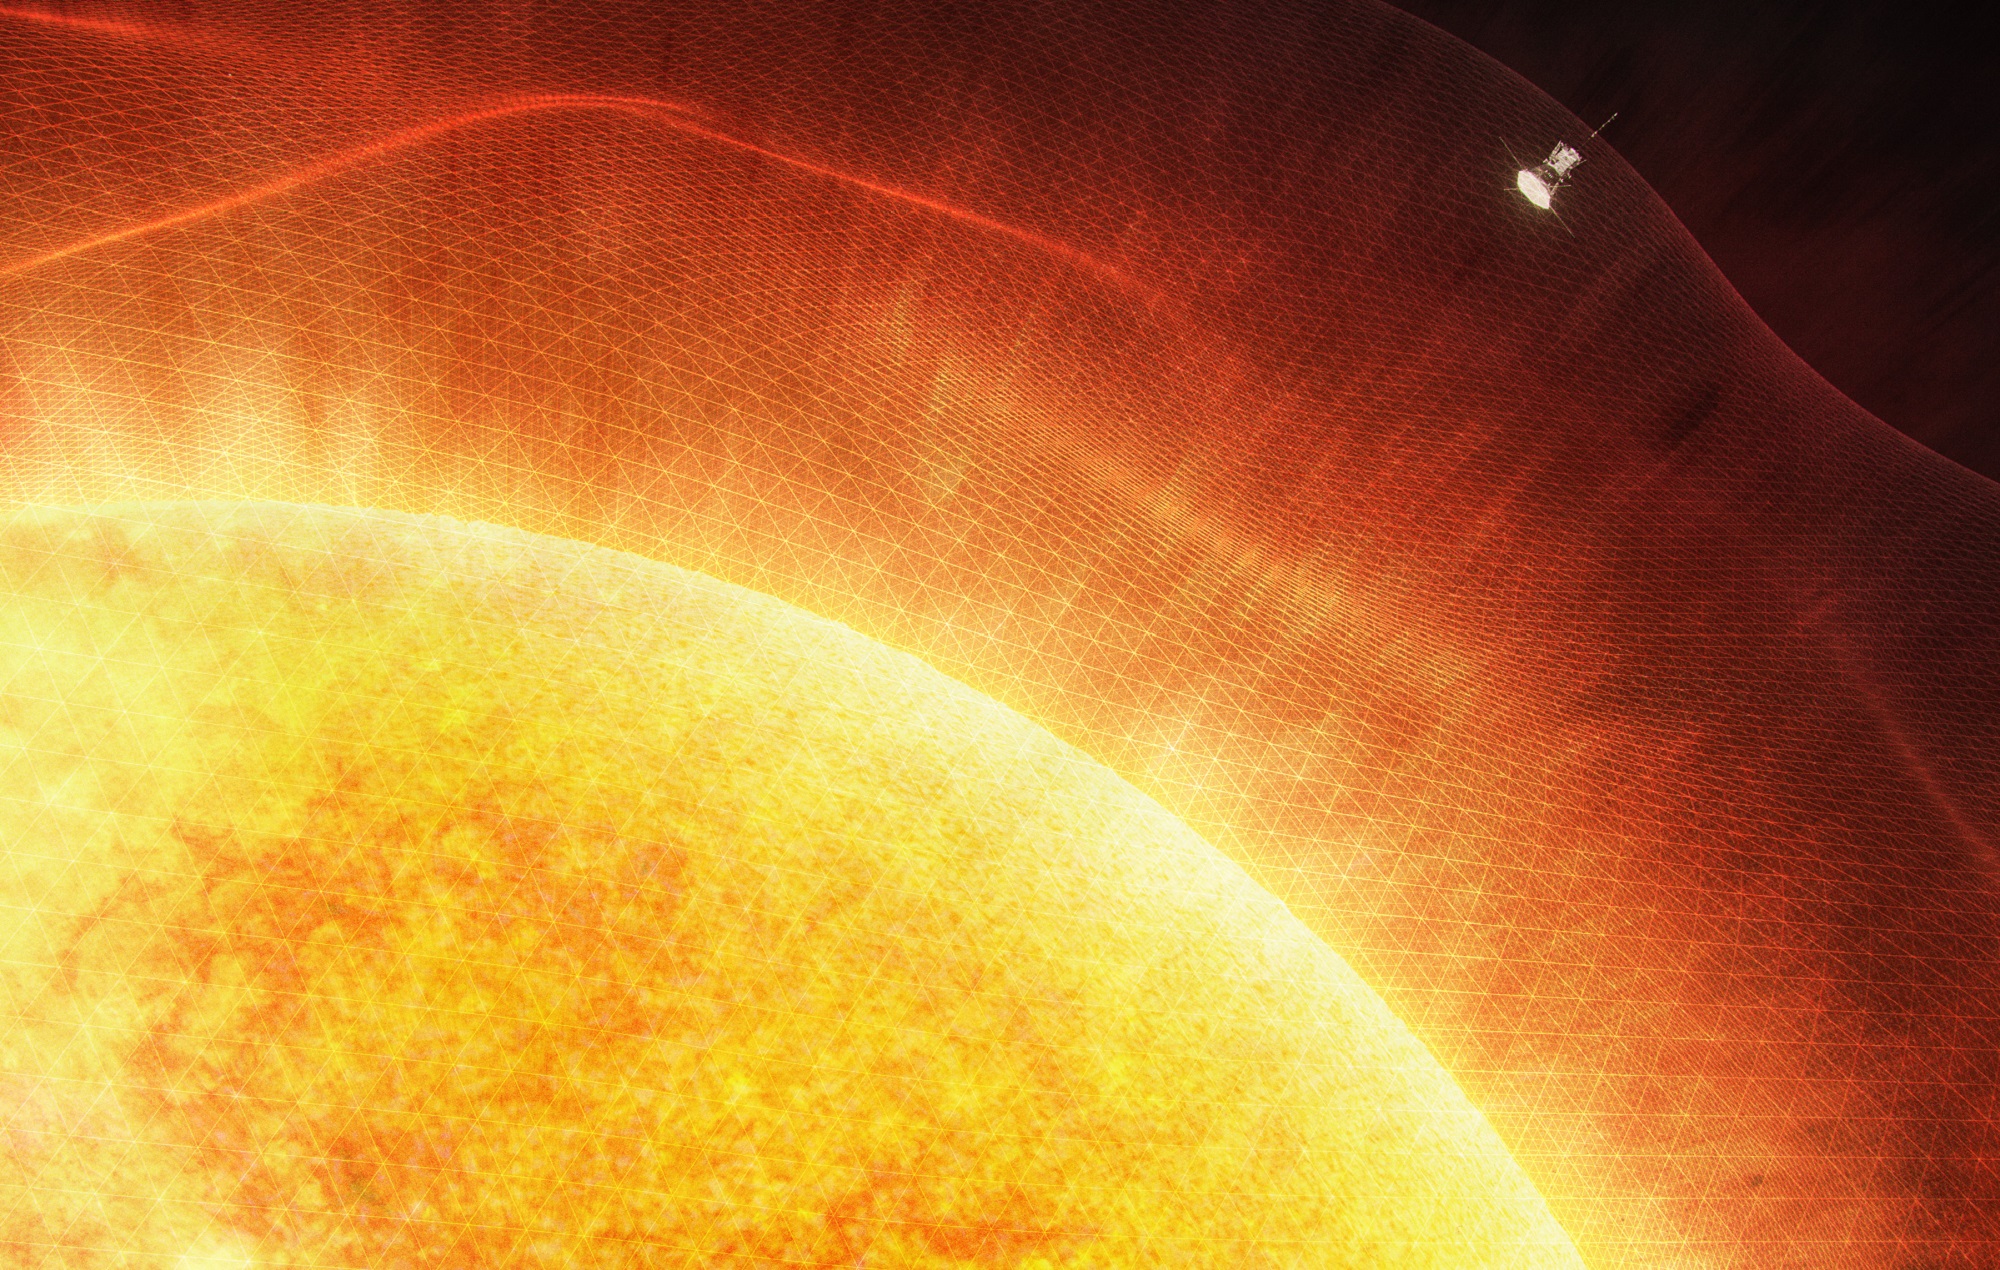 Why is the sun’s corona 200 times hotter than its surface?